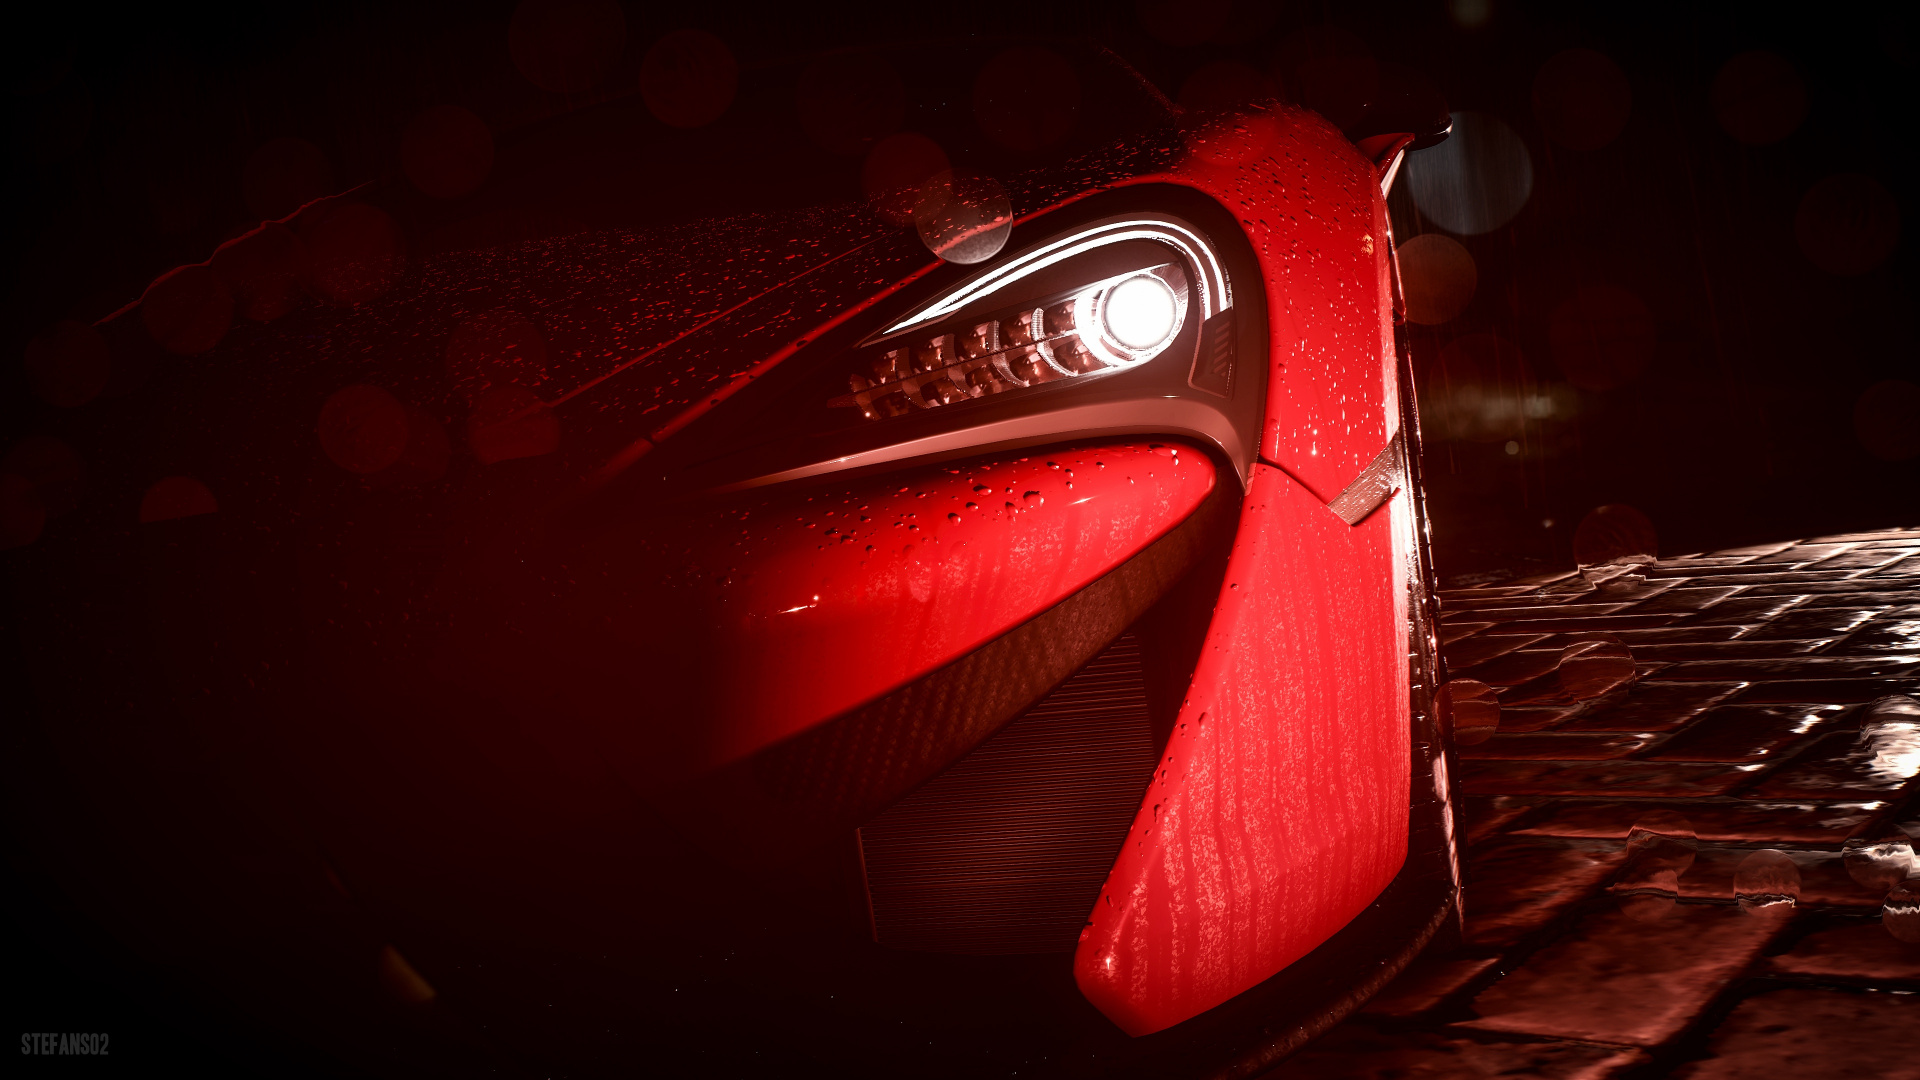 Red and Silver Car in a Dark Room. Wallpaper in 1920x1080 Resolution